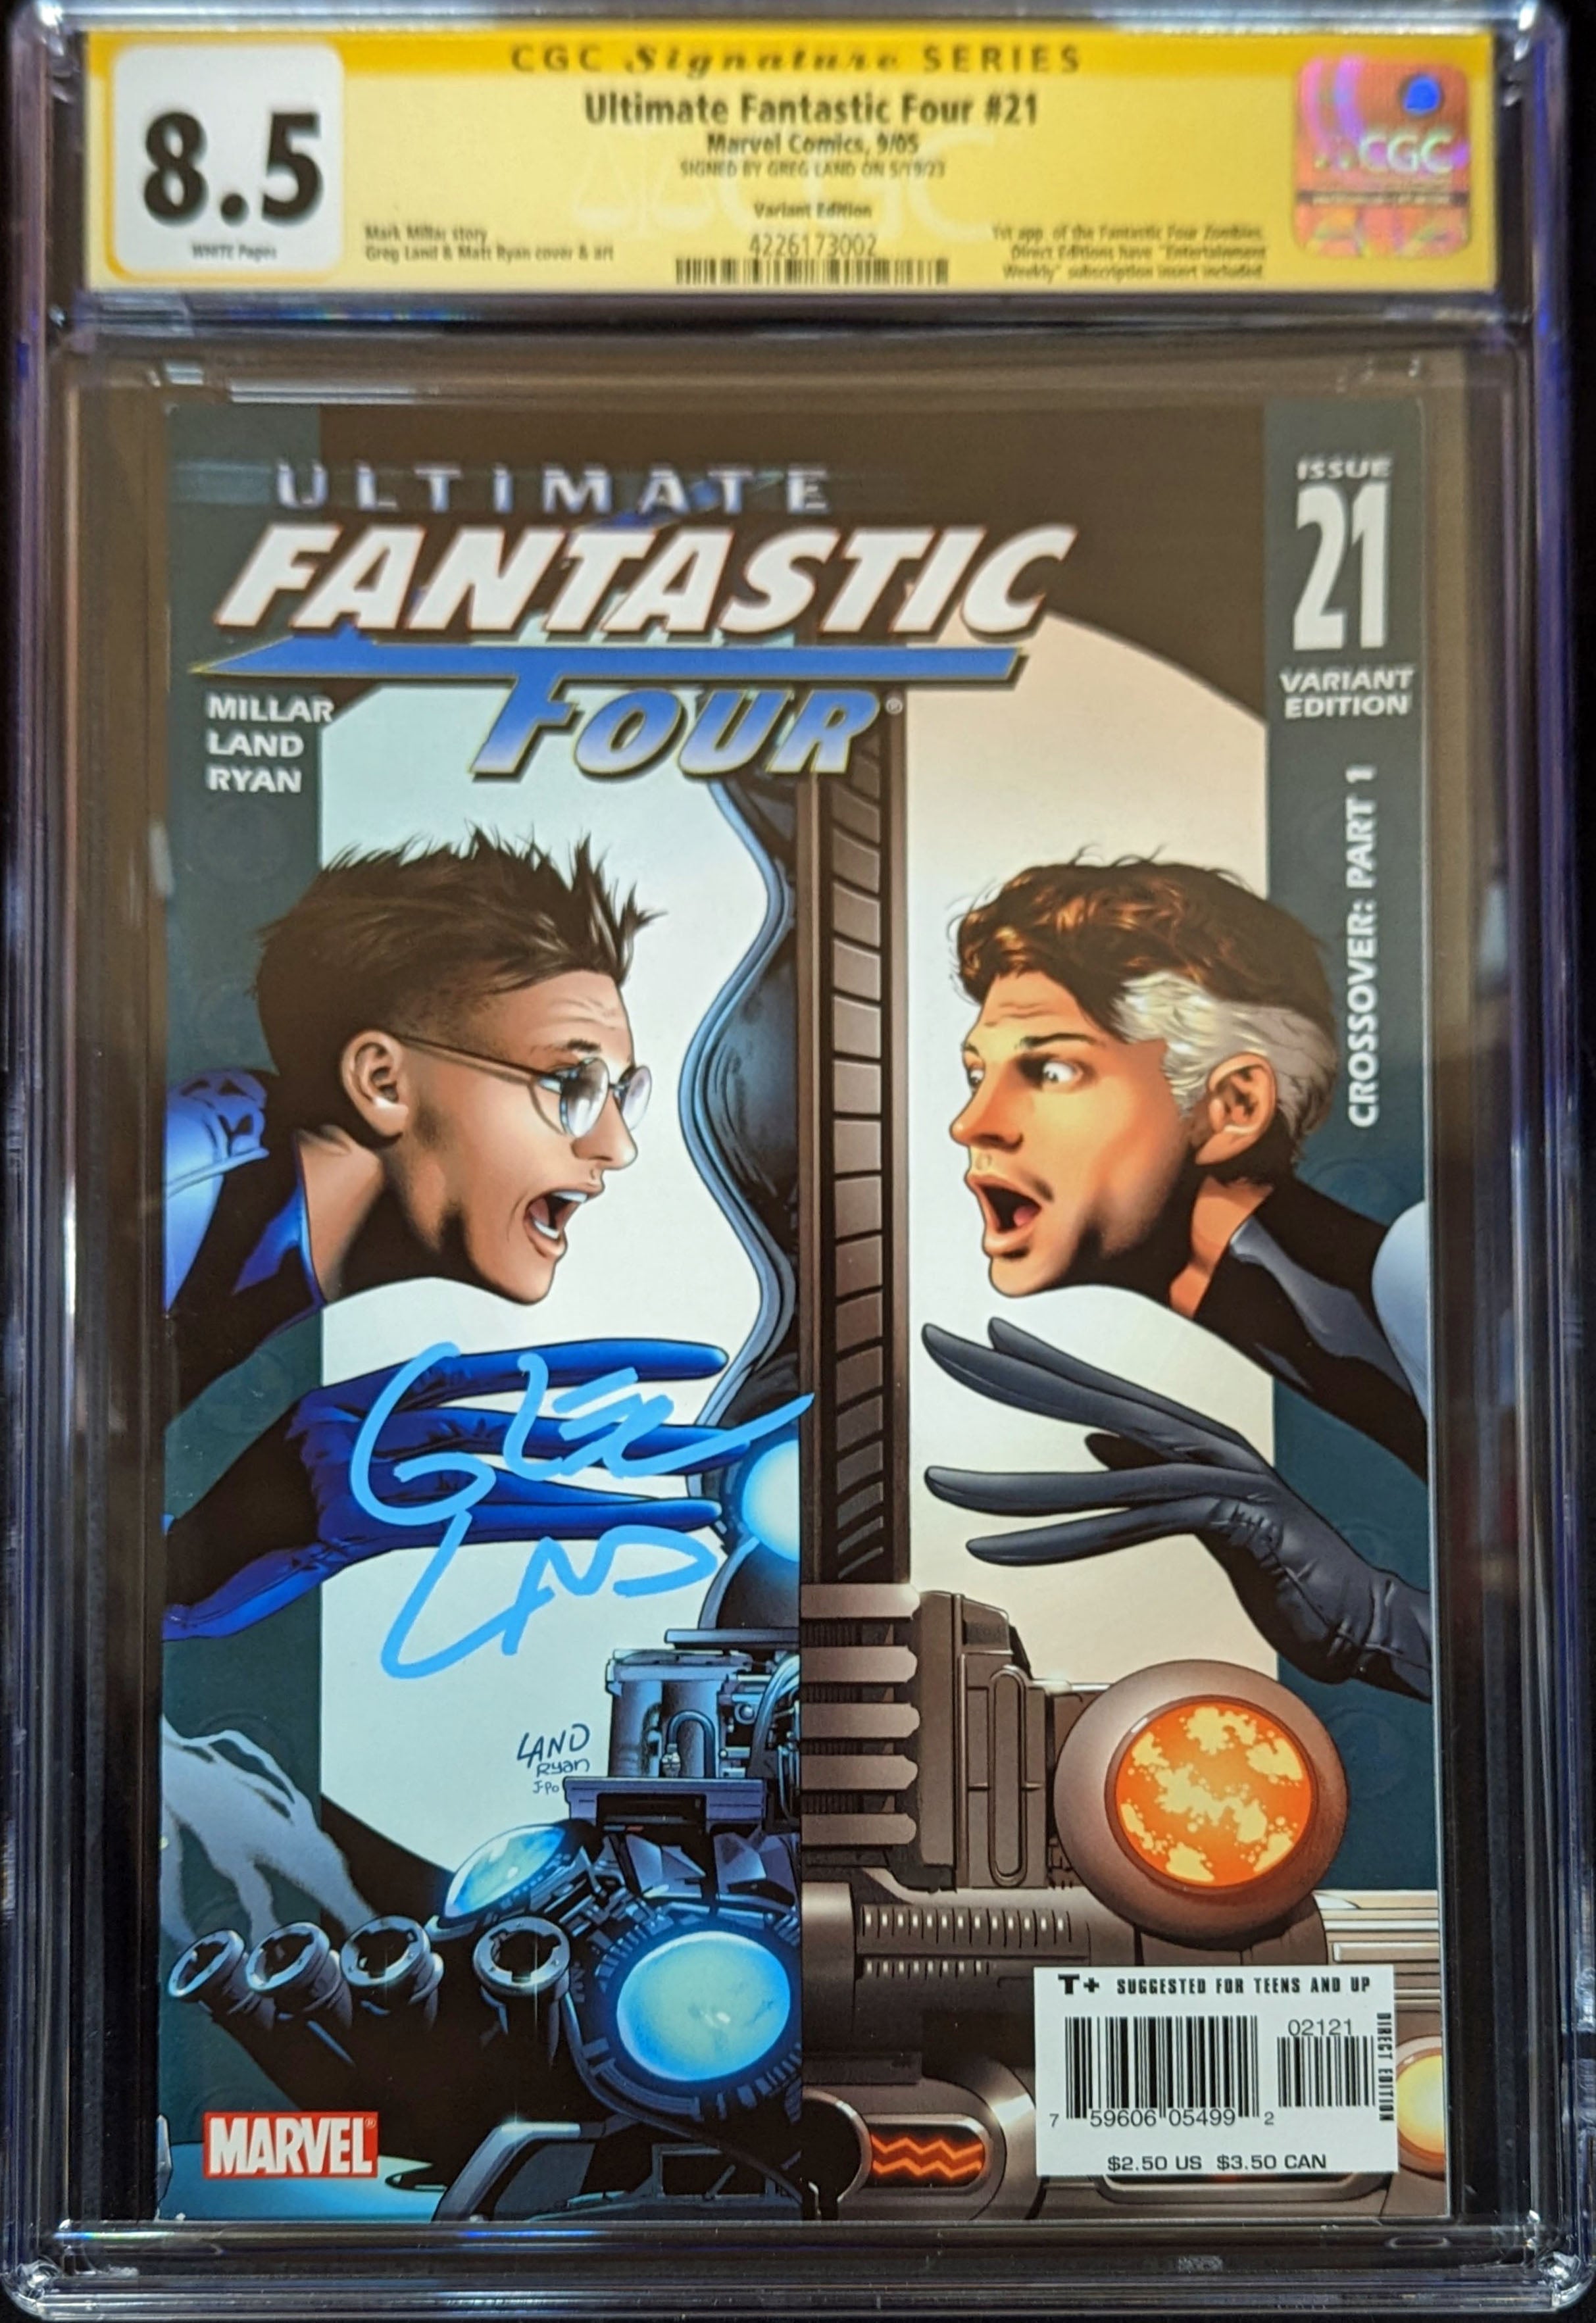 ULTIMATE FANTASTIC FOUR VAR ED #21 CGC 8.5 Signed by Greg Land 1st Marvel Zombies